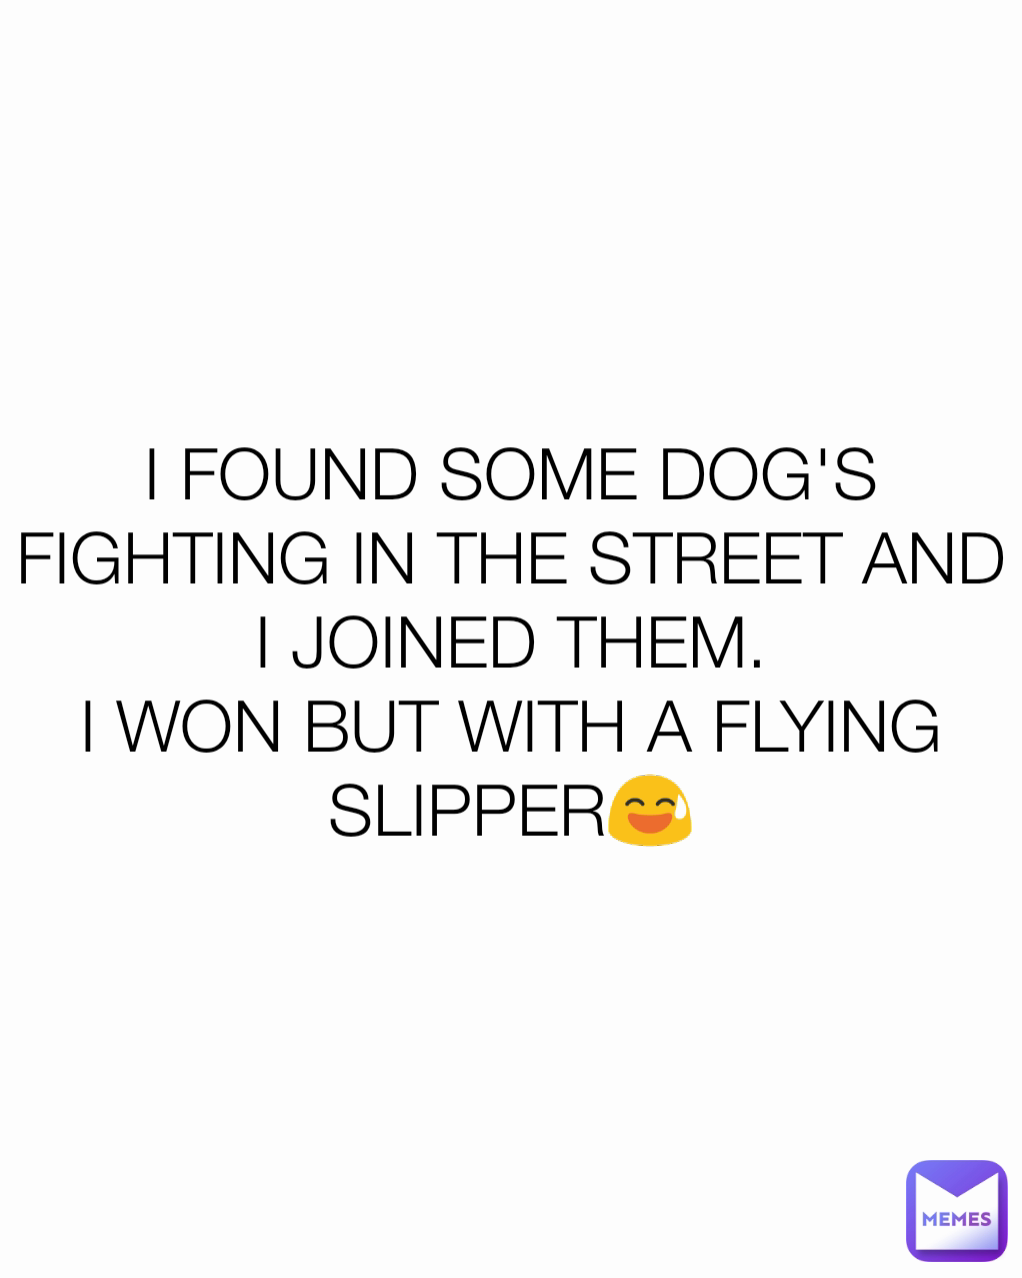 I FOUND SOME DOG'S FIGHTING IN THE STREET AND I JOINED THEM.
I WON BUT WITH A FLYING SLIPPER😅